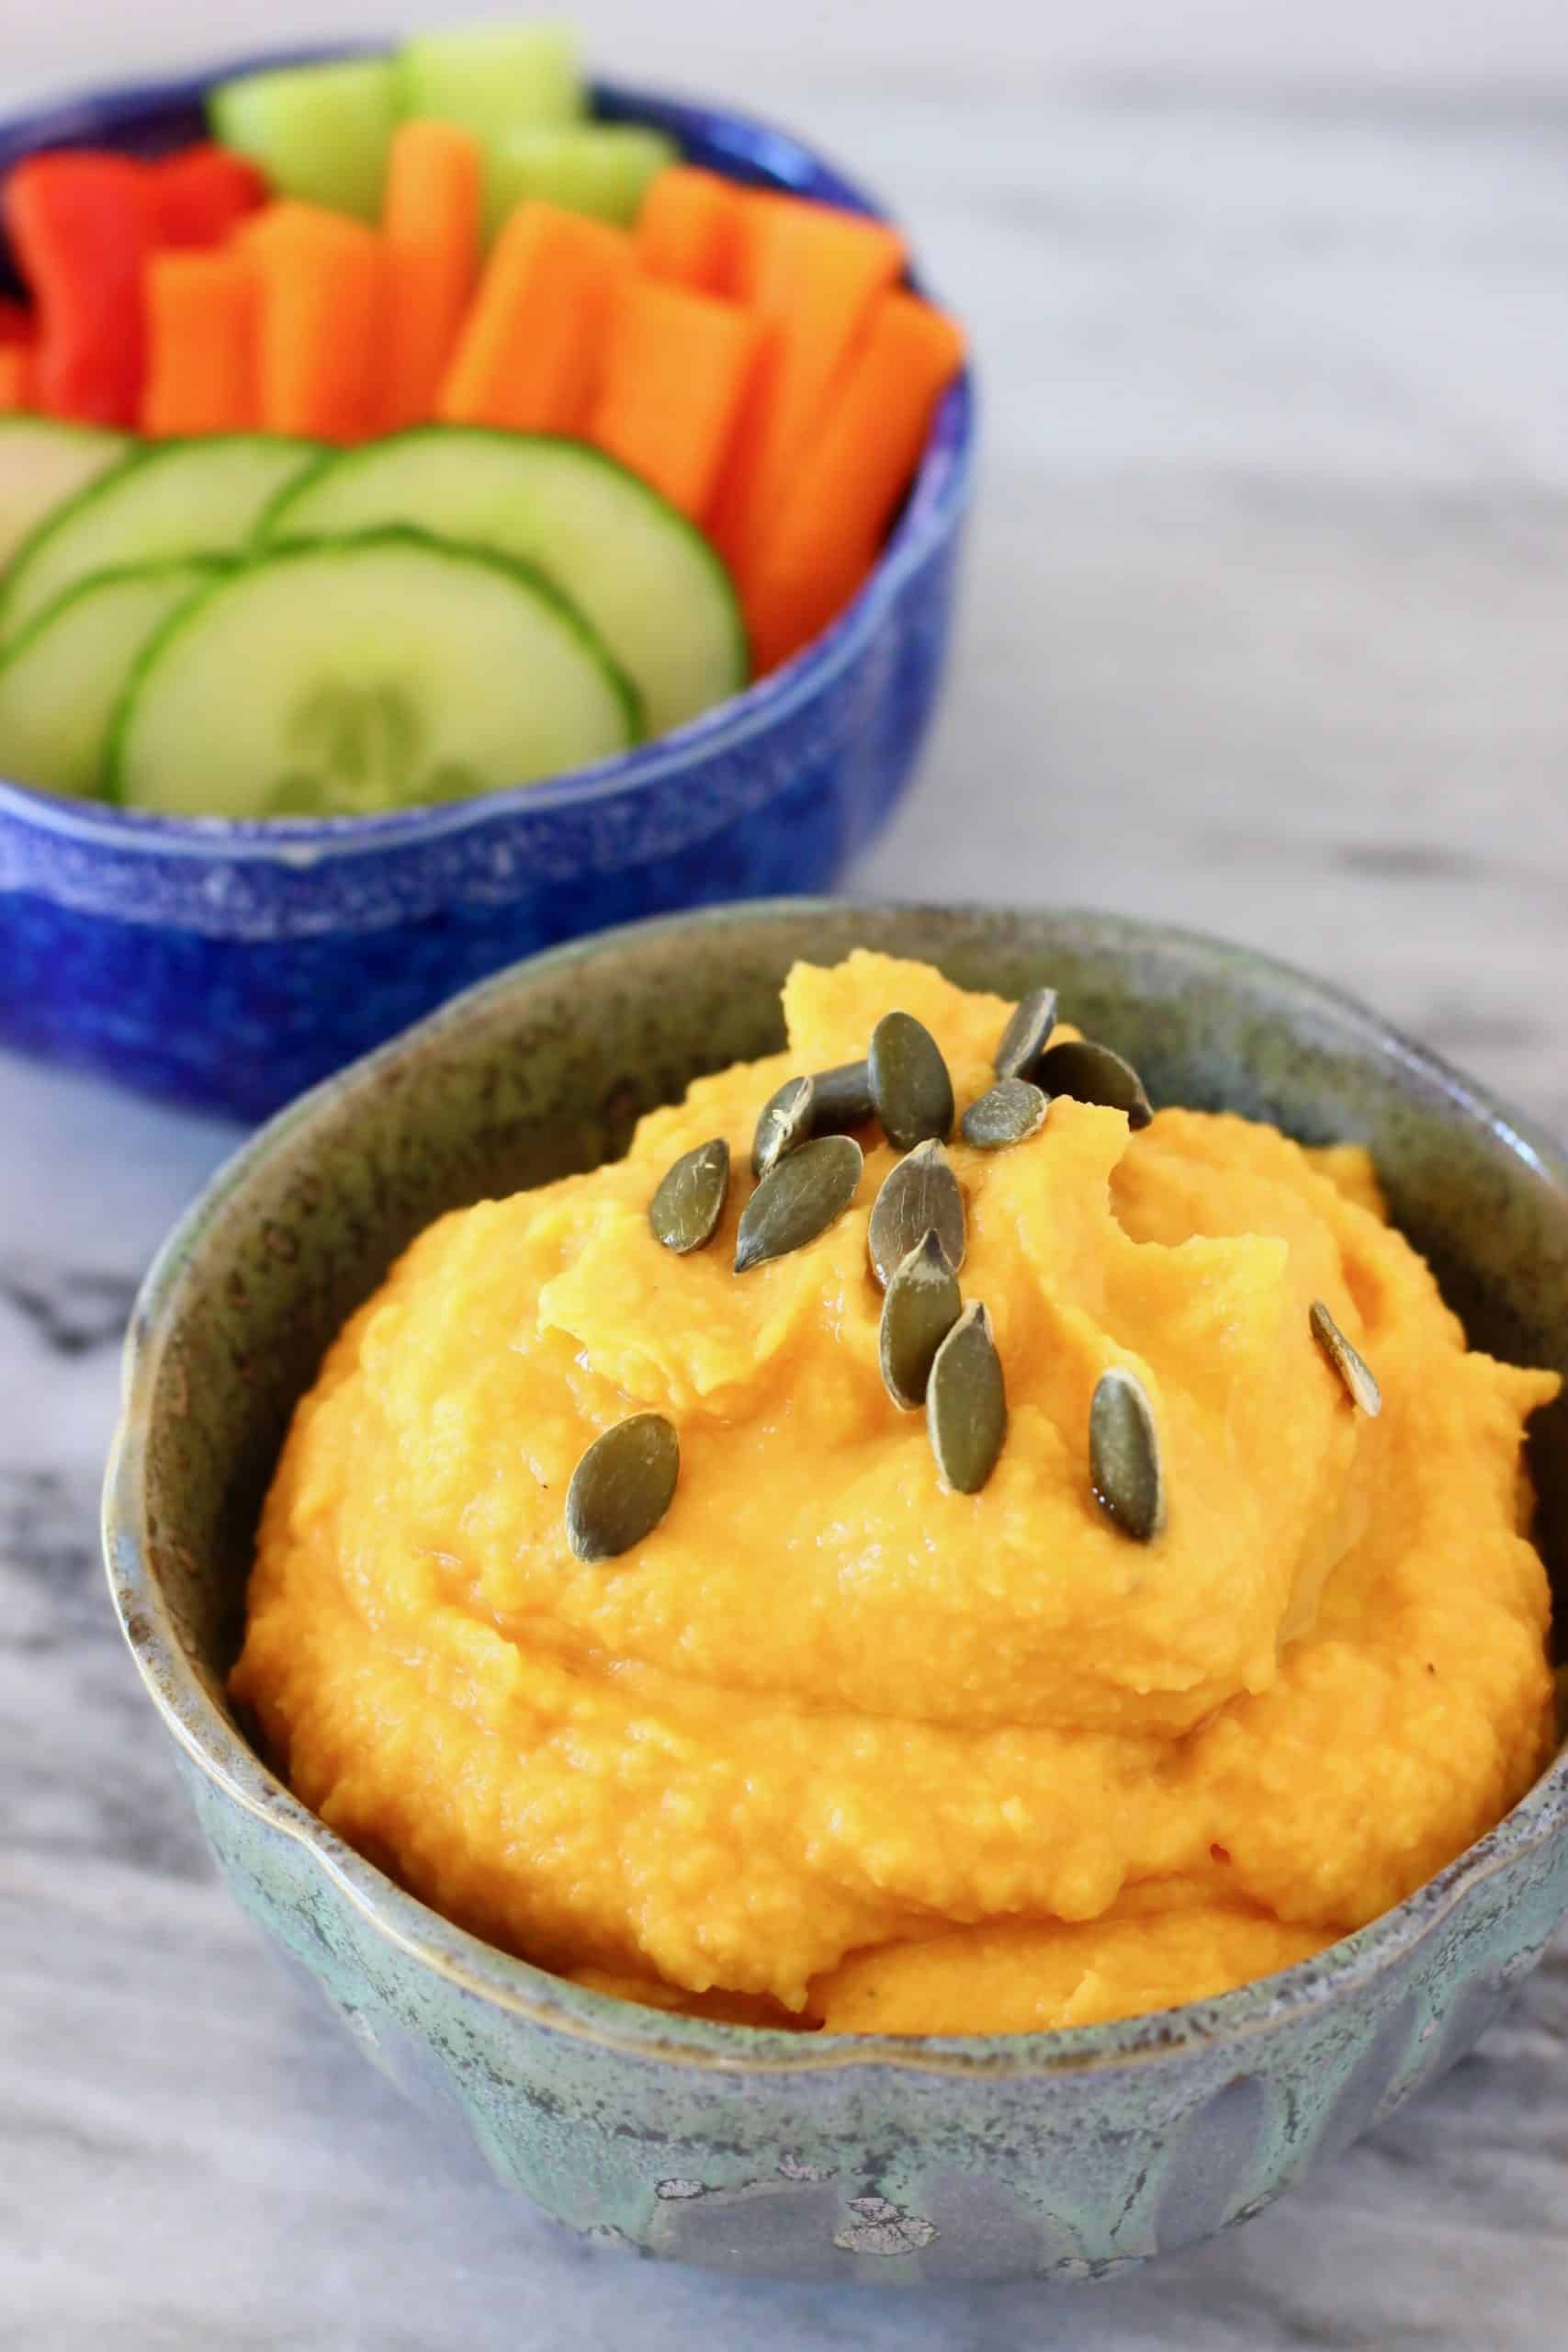 Pumpkin hummus in a grey bowl topped with pumpkin seeds with raw vegetables in another bowl